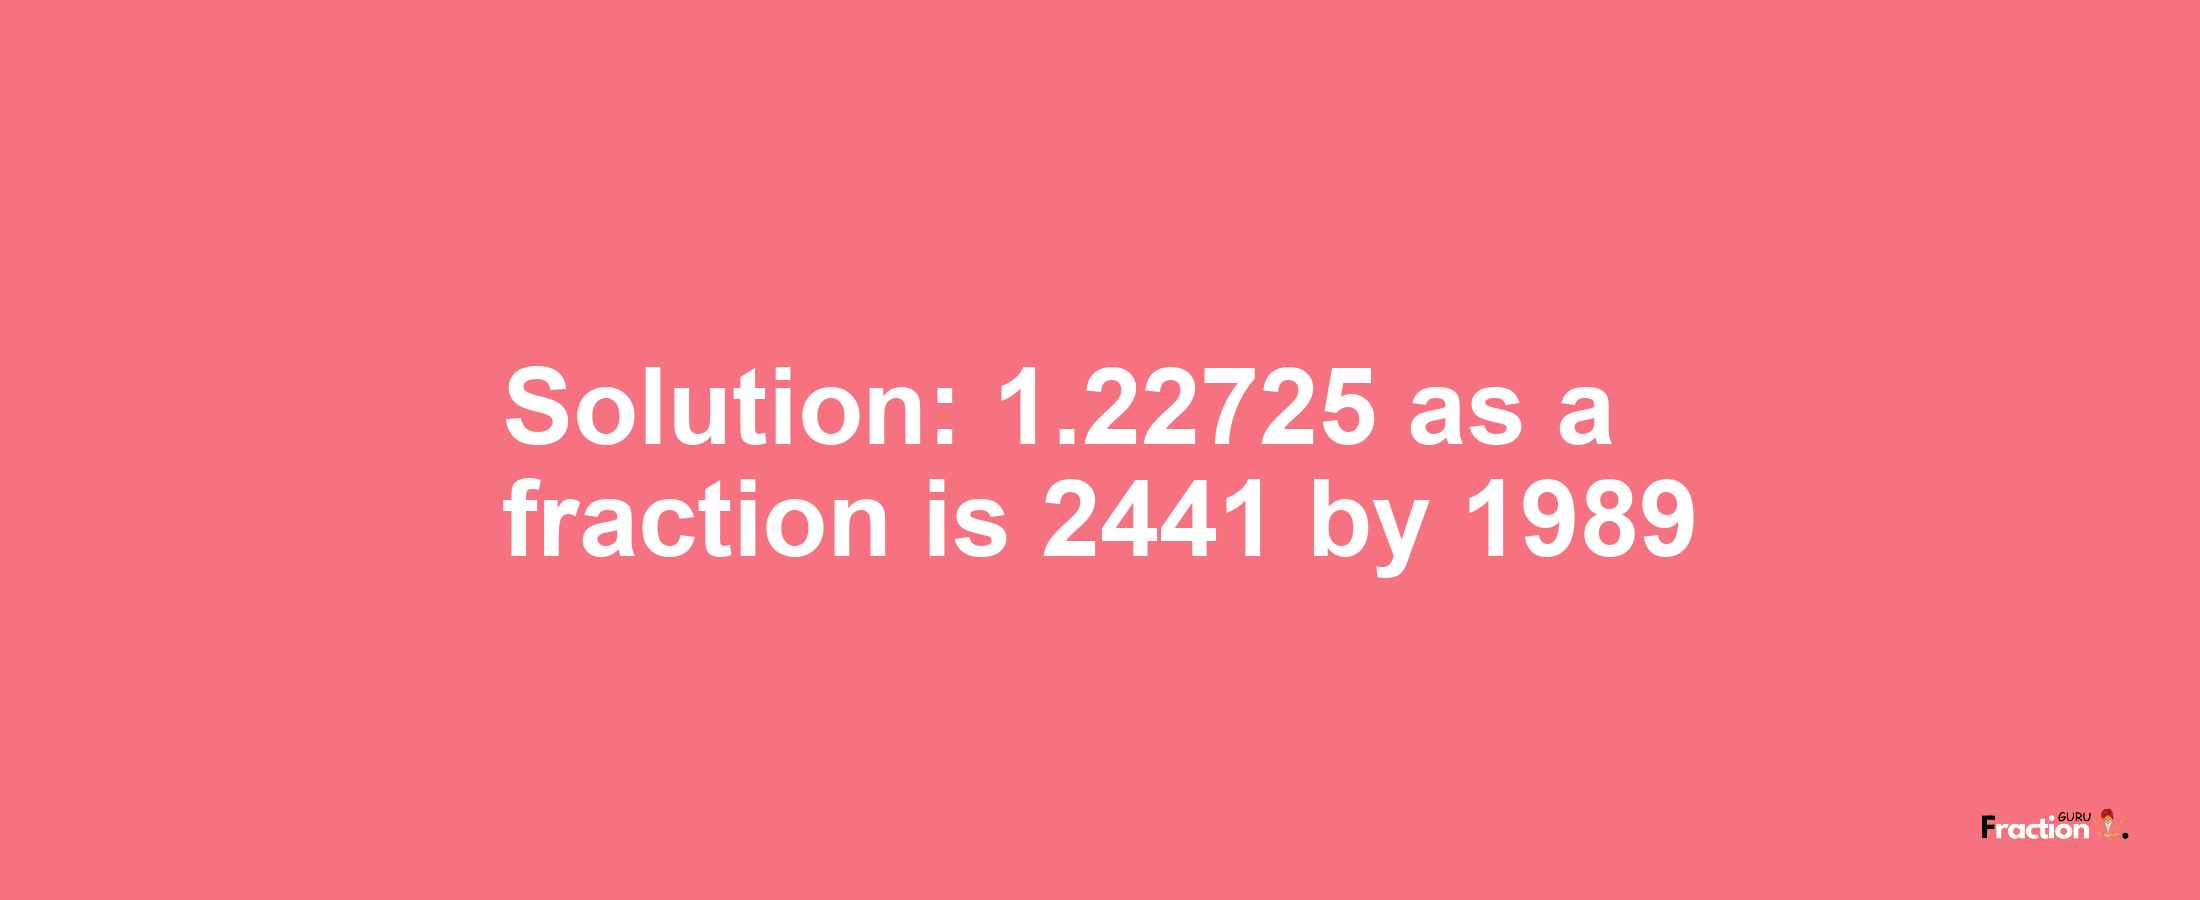 Solution:1.22725 as a fraction is 2441/1989